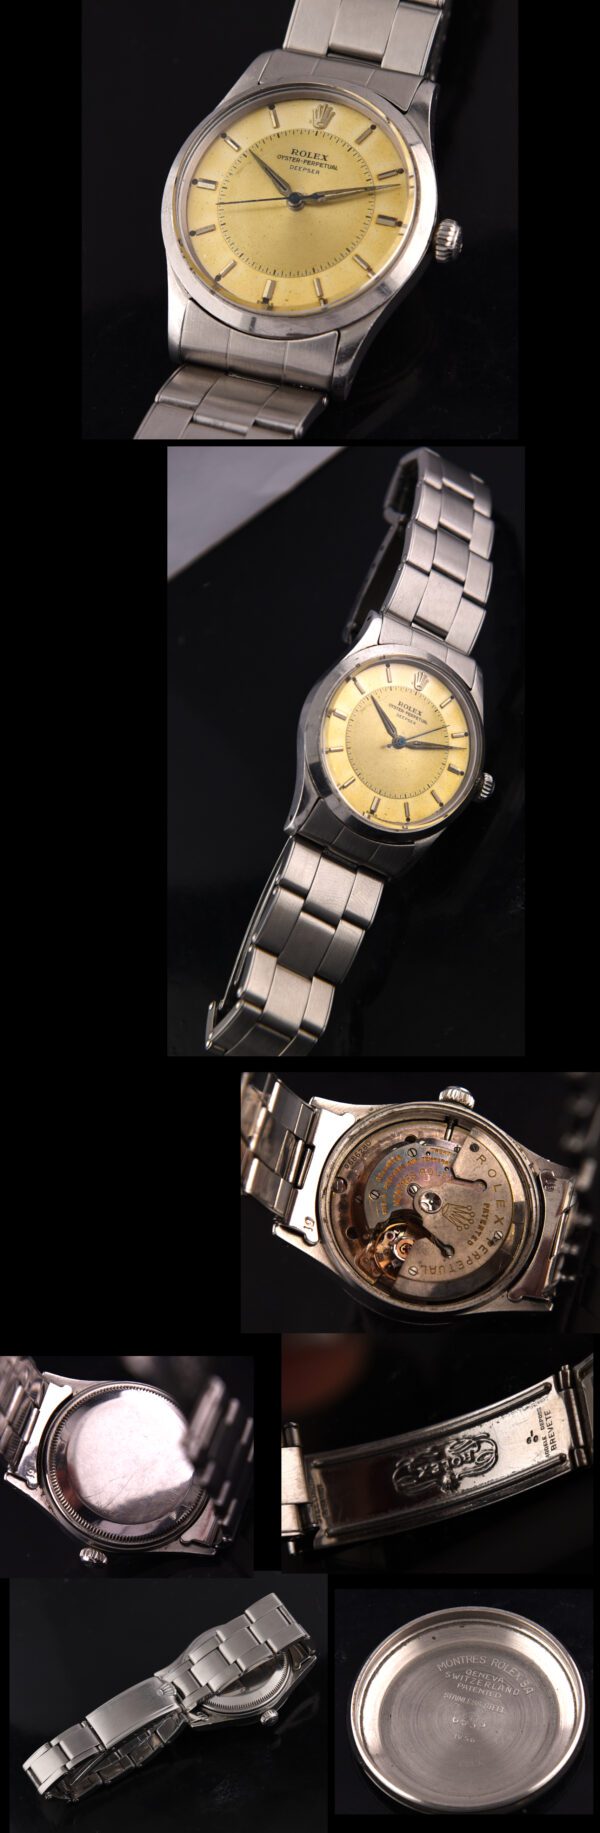 1956 Rolex 34mm Deepsea stainless steel watch with original unpolished case, Dauphine hands, crown, and automatic butterfly rotor movement.